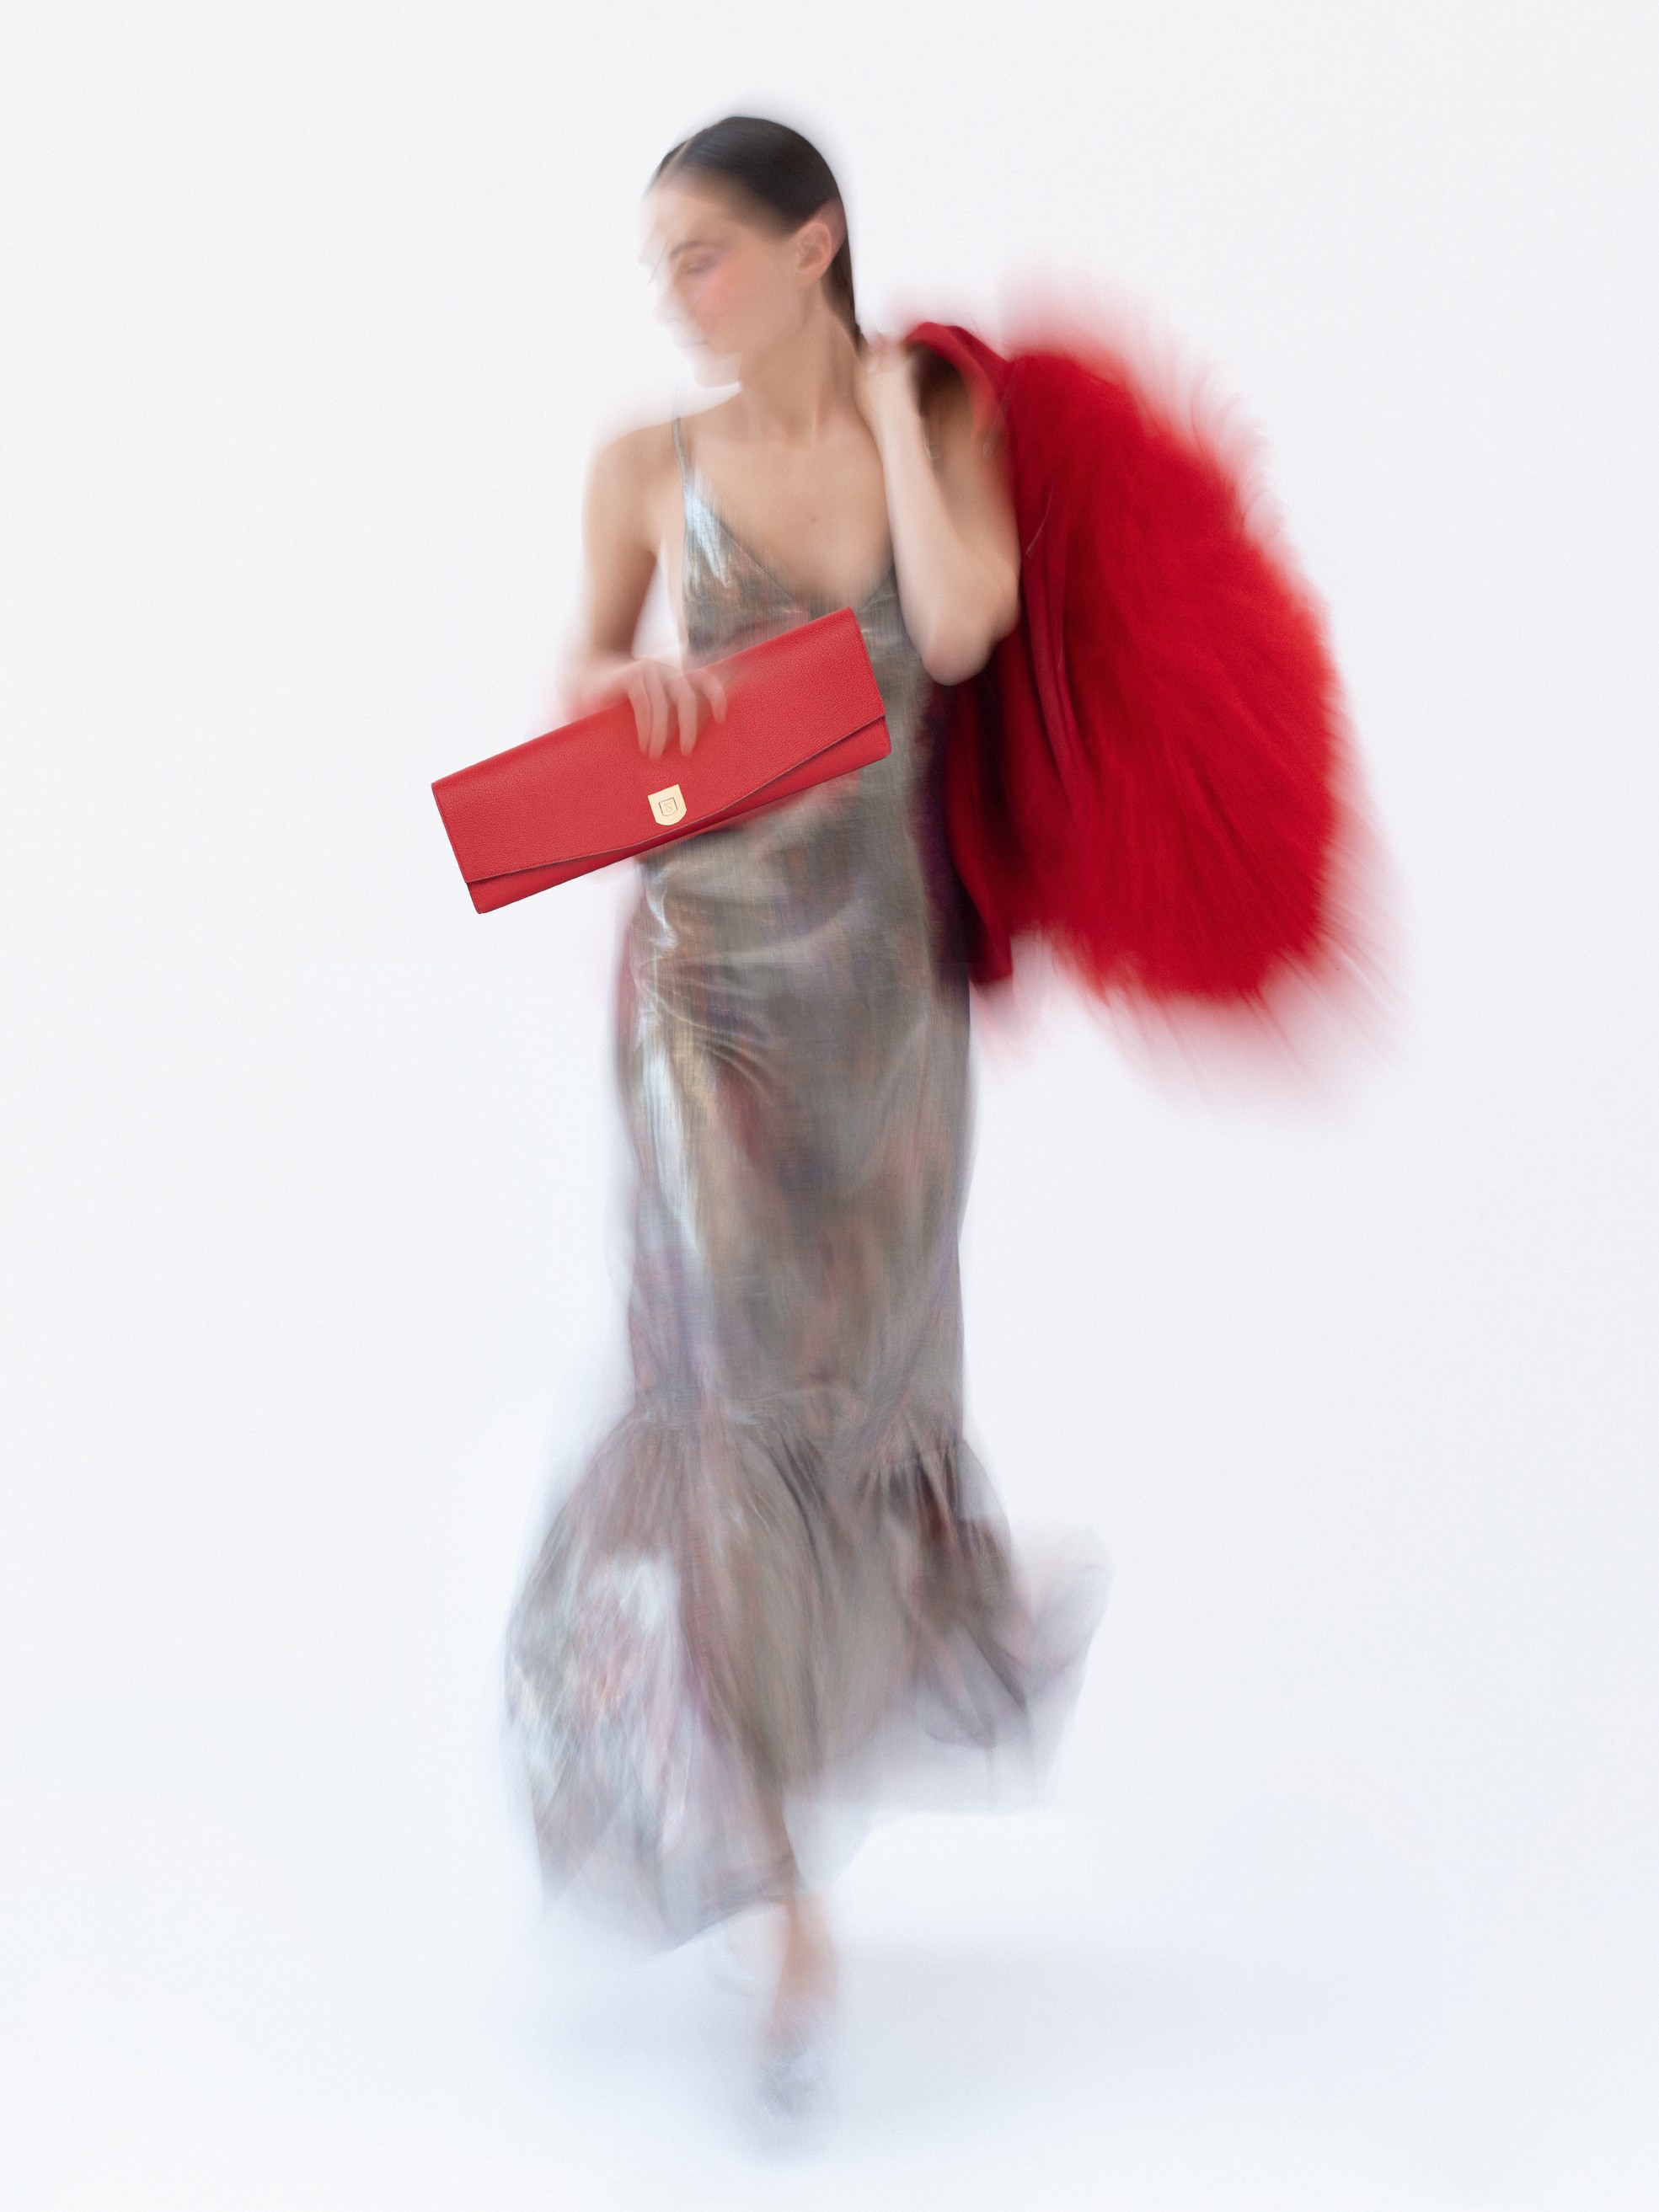 D'Auchel’s Christine clutch bag in red leather – one of many handmade designs that can be created from scratch by a French atelier to suit your personal requirements – is one of our great Mother’s Day gift ideas.